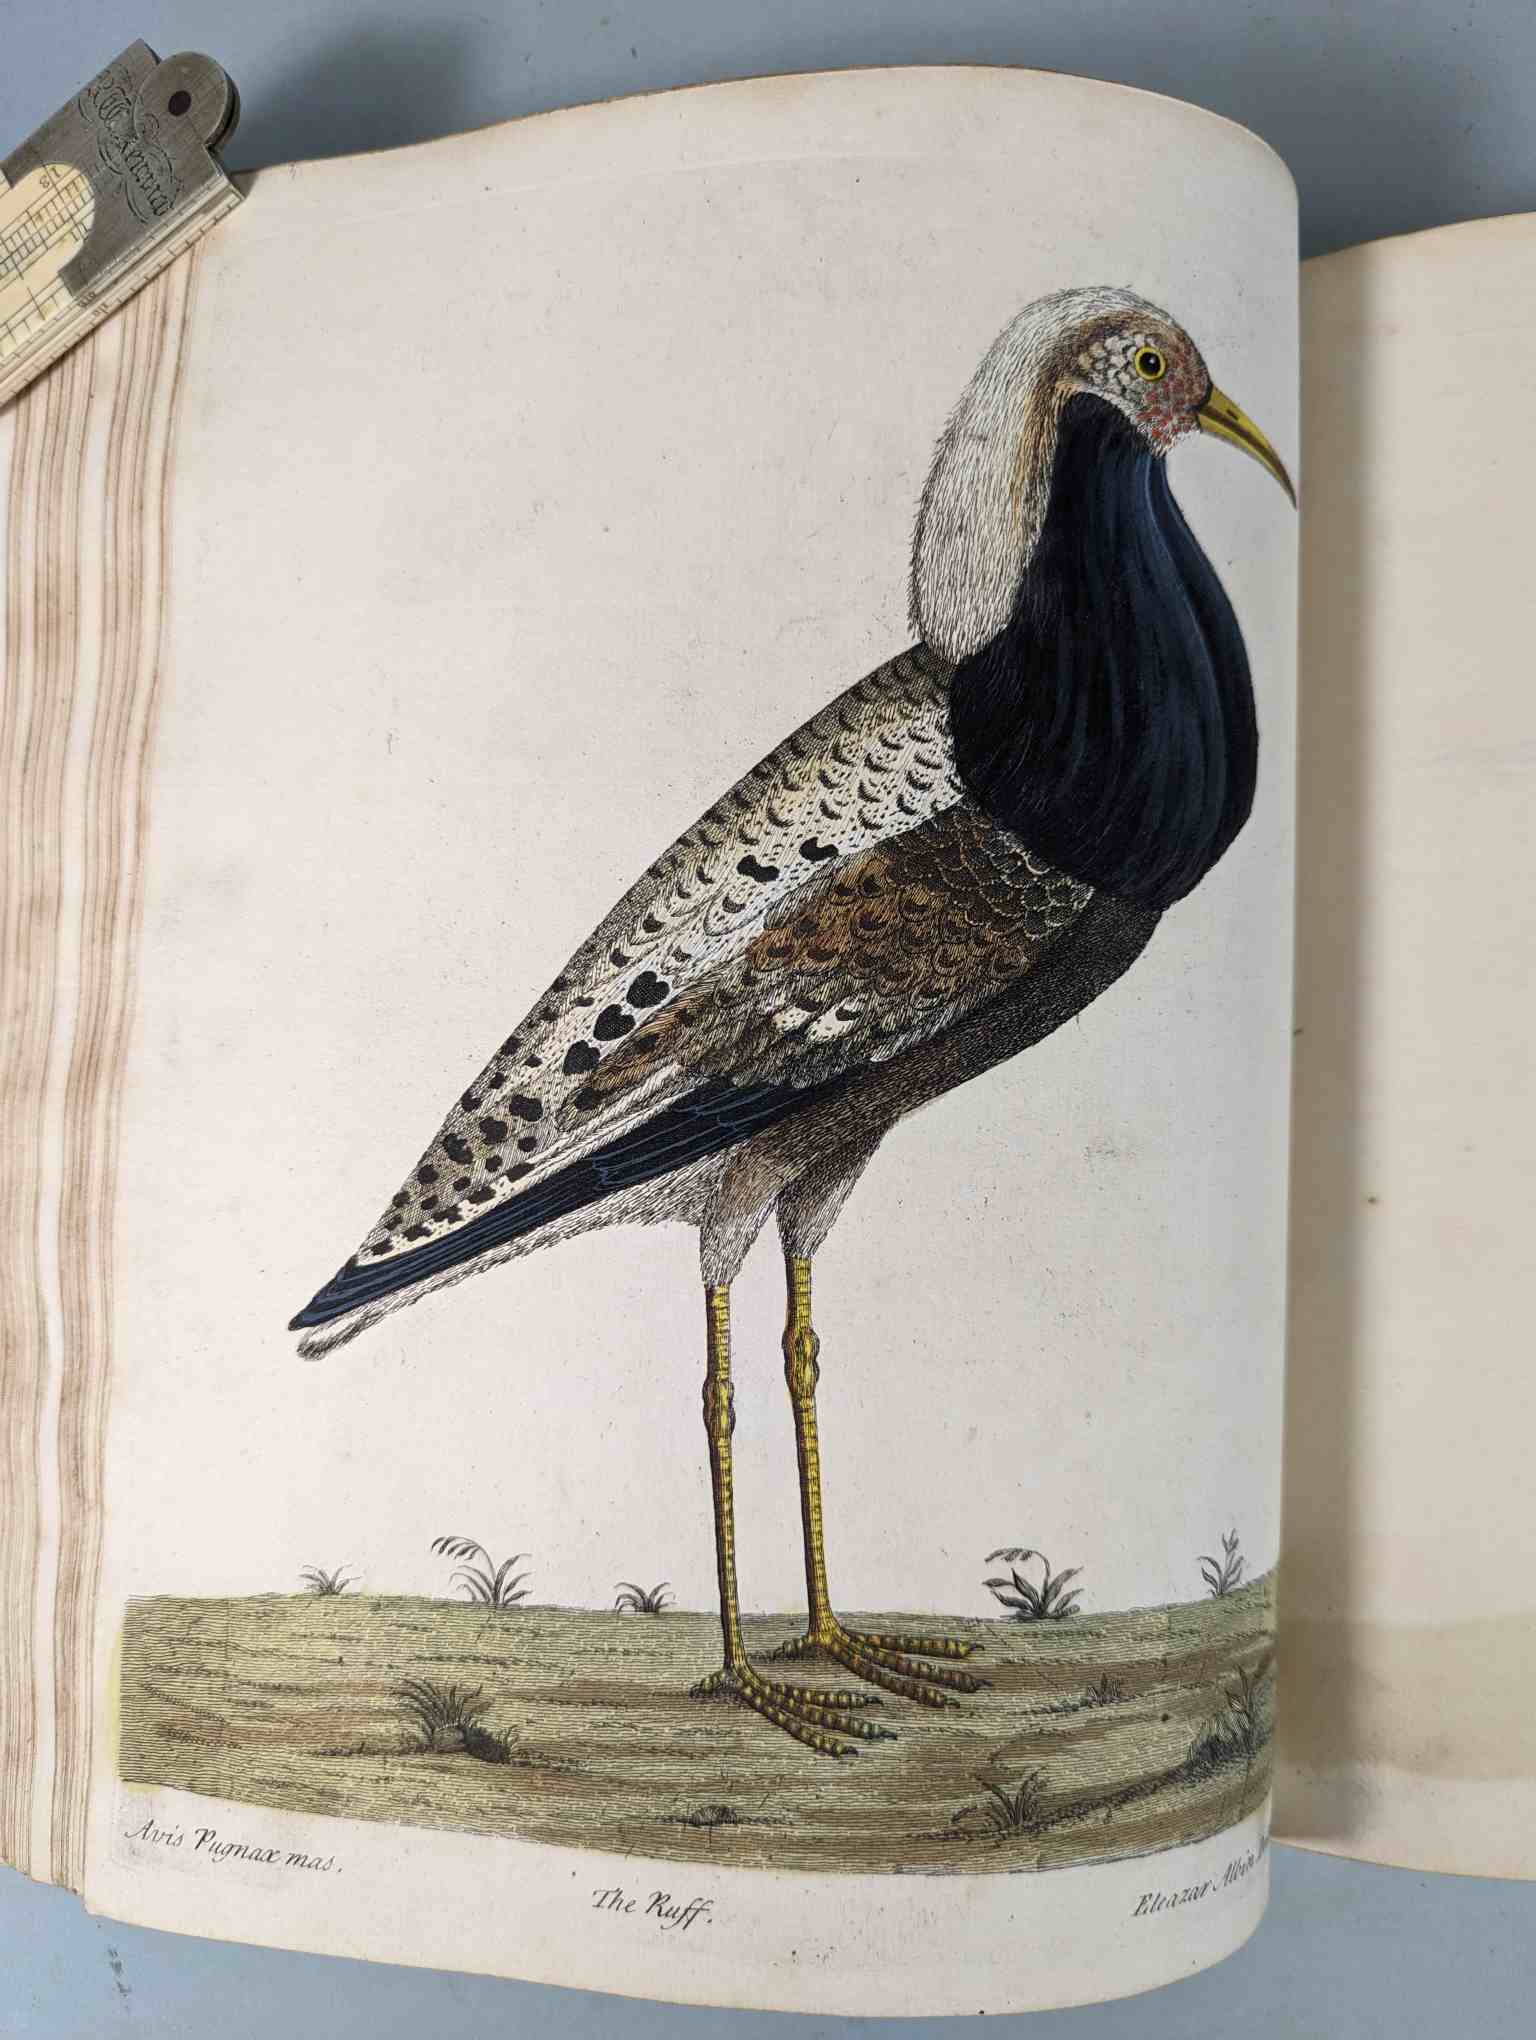 ALBIN, Eleazar. A Natural History of Birds, to which are added, Notes and Observations by W. - Image 75 of 208